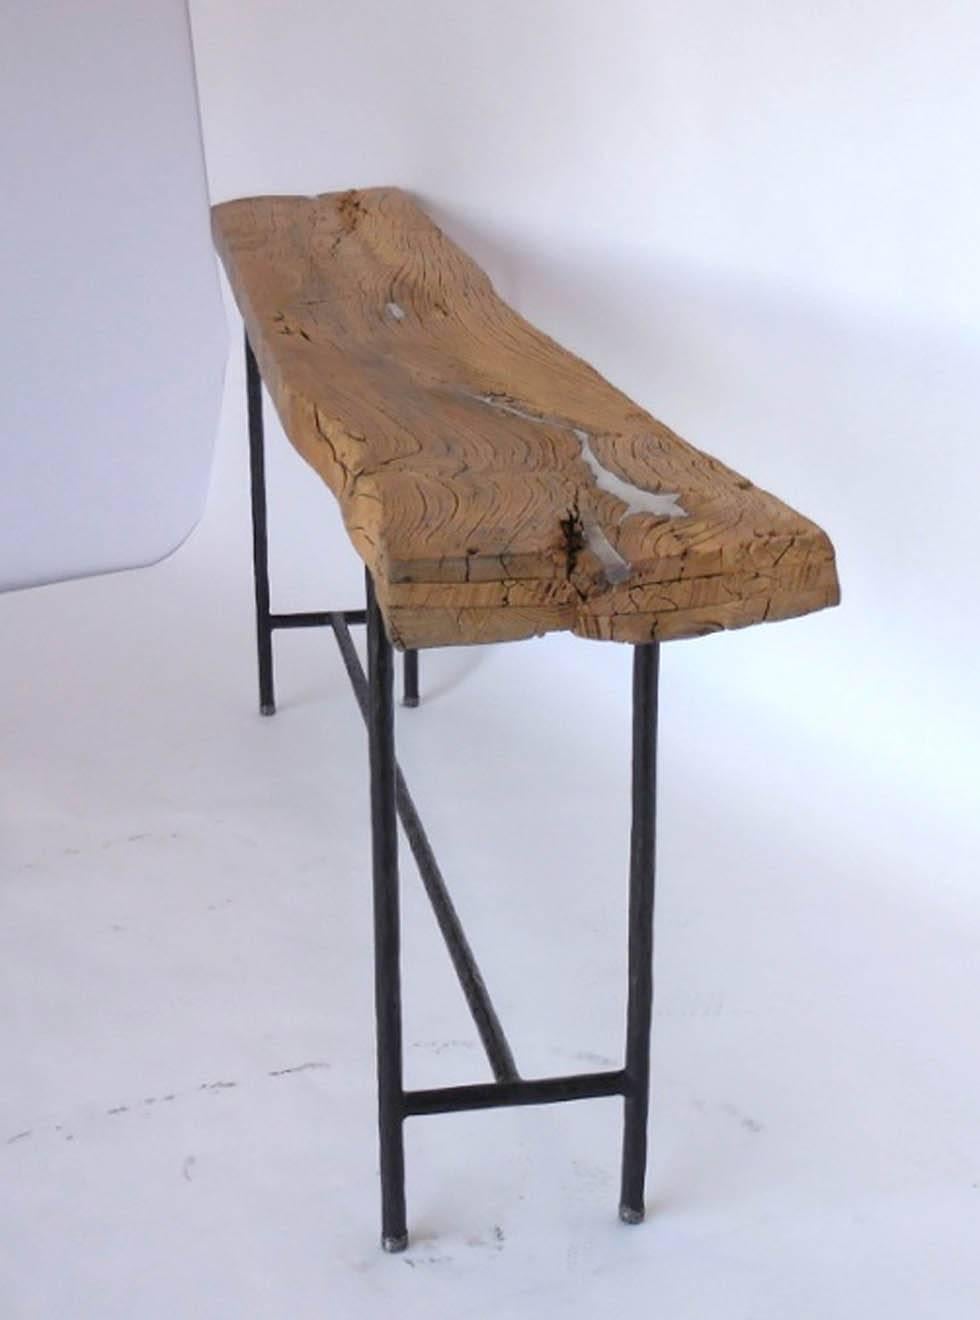 Early 19th century Japanese Elm inlaid with Pewter. Smooth and very worn original finish. Hand-forged iron legs capped in Pewter with three stretchers. One of a kind modern yet rustic piece. Dos Gallos Studio.